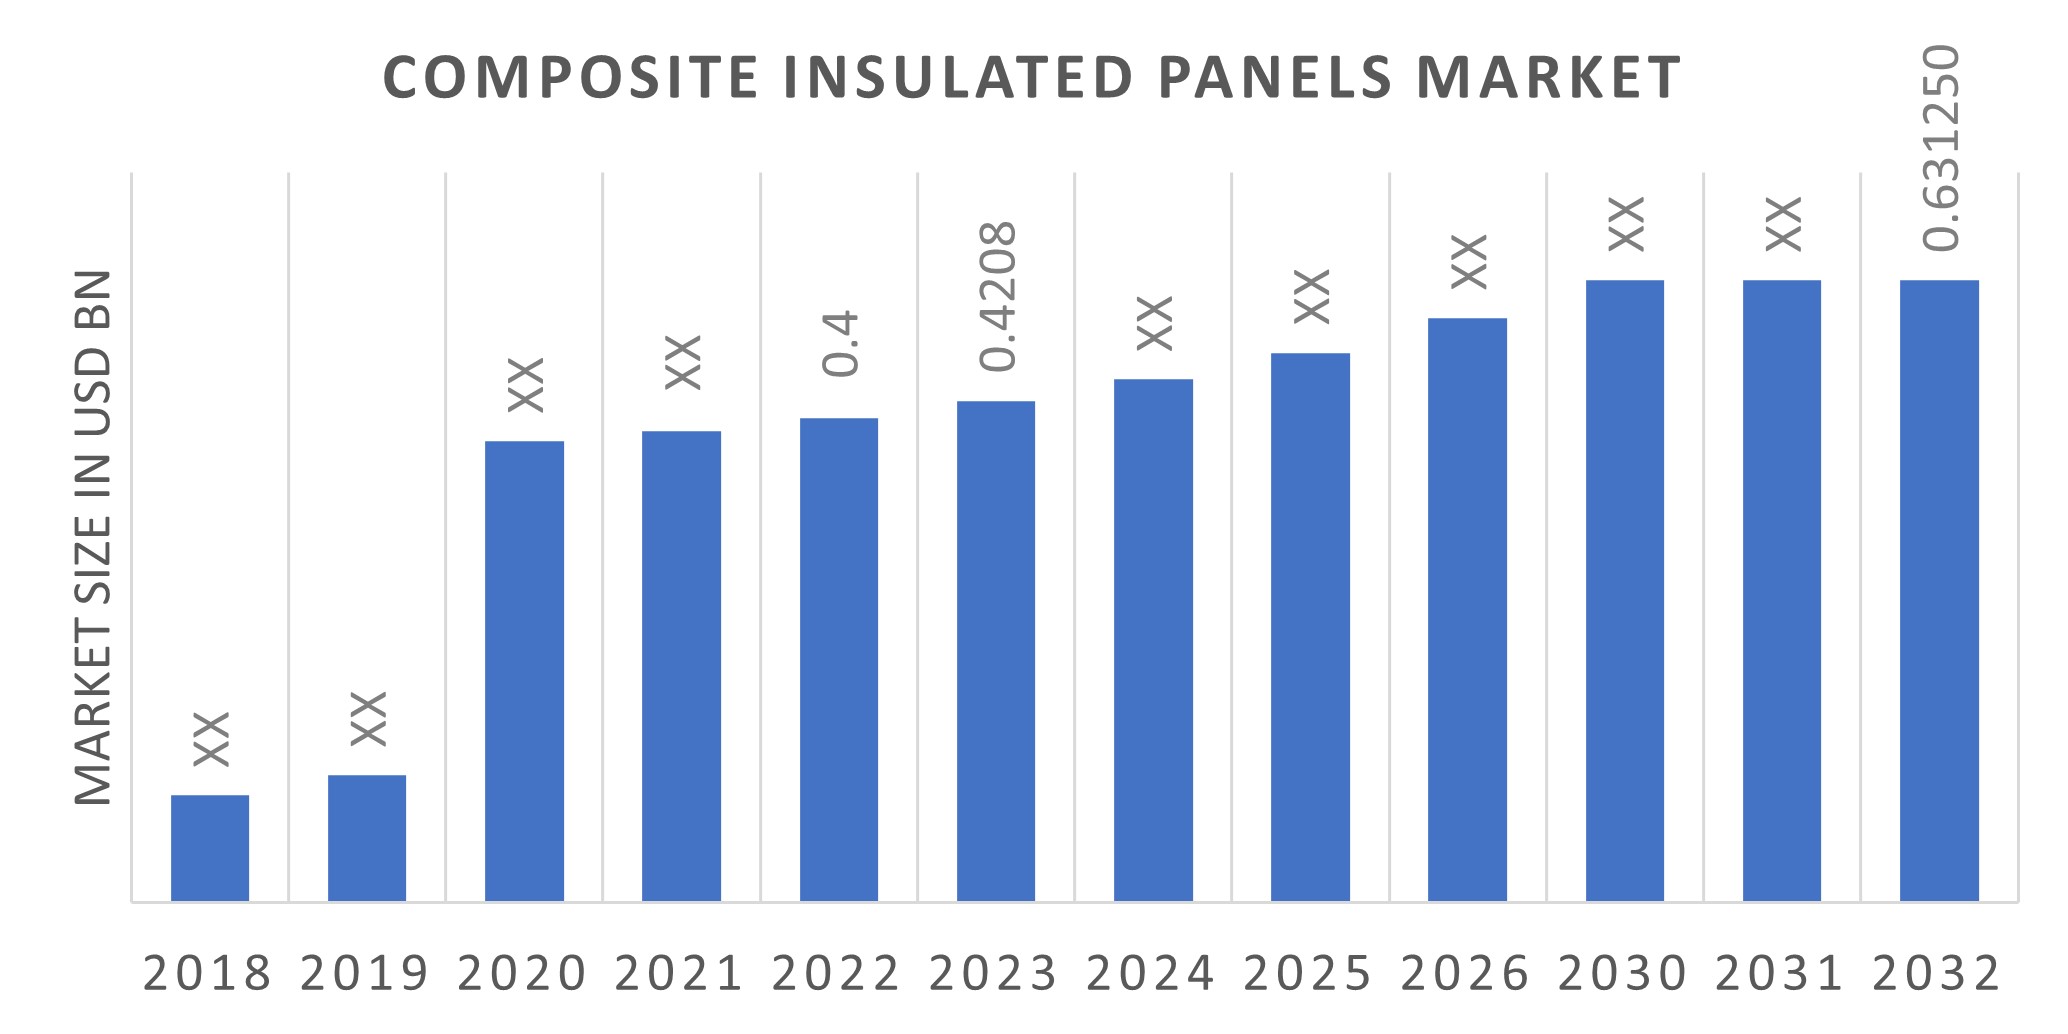 Global Composite Insulated Panels Market